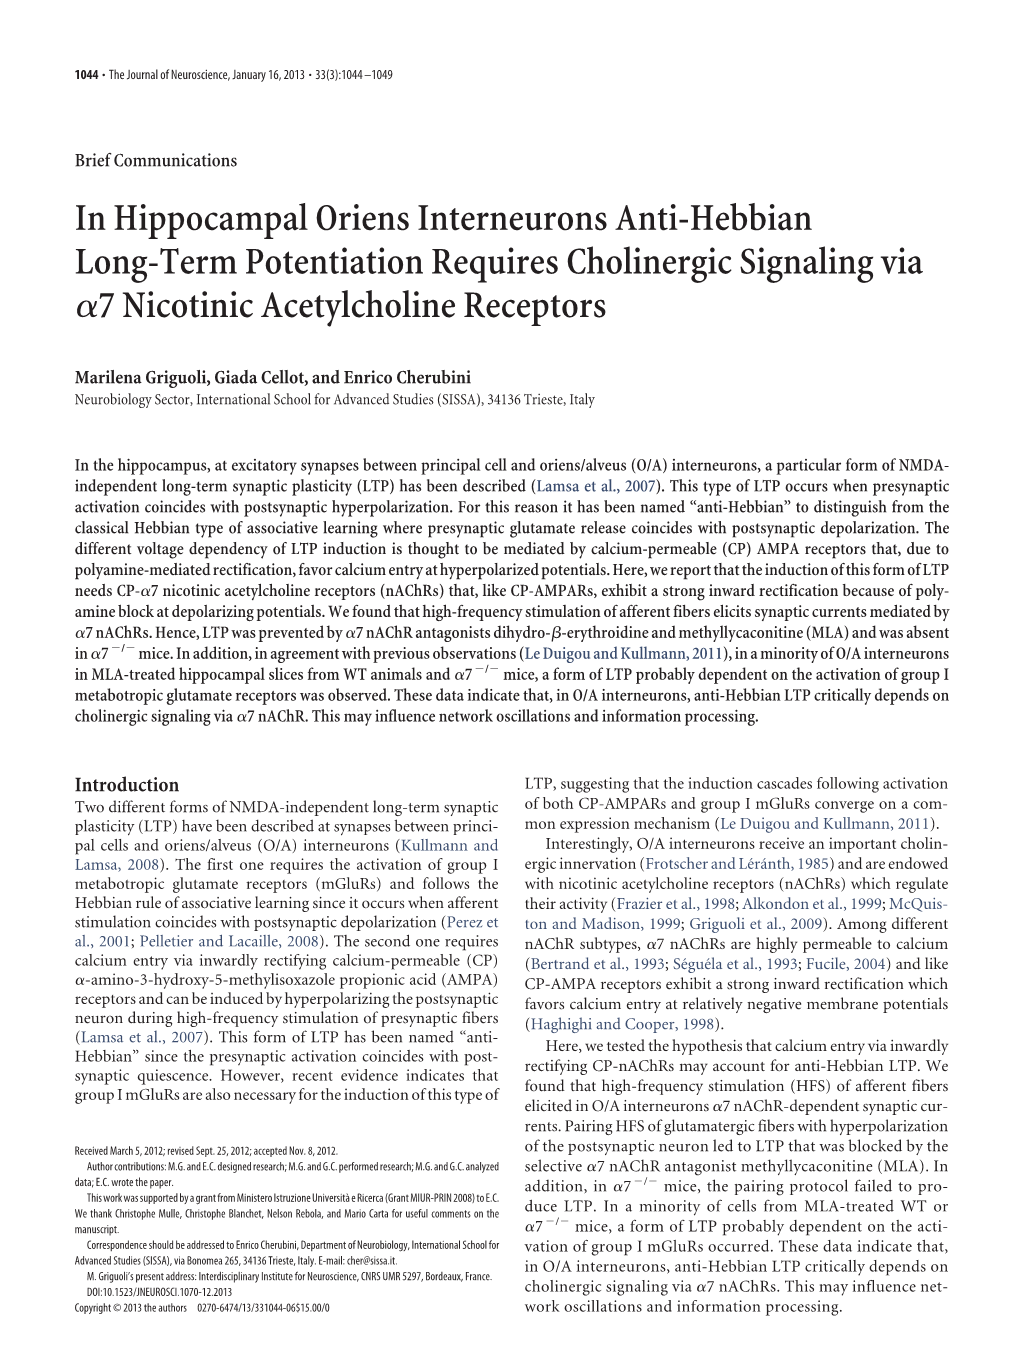 In Hippocampal Oriens Interneurons Anti-Hebbian Long-Term Potentiation Requires Cholinergic Signaling Via ␣7 Nicotinic Acetylcholine Receptors